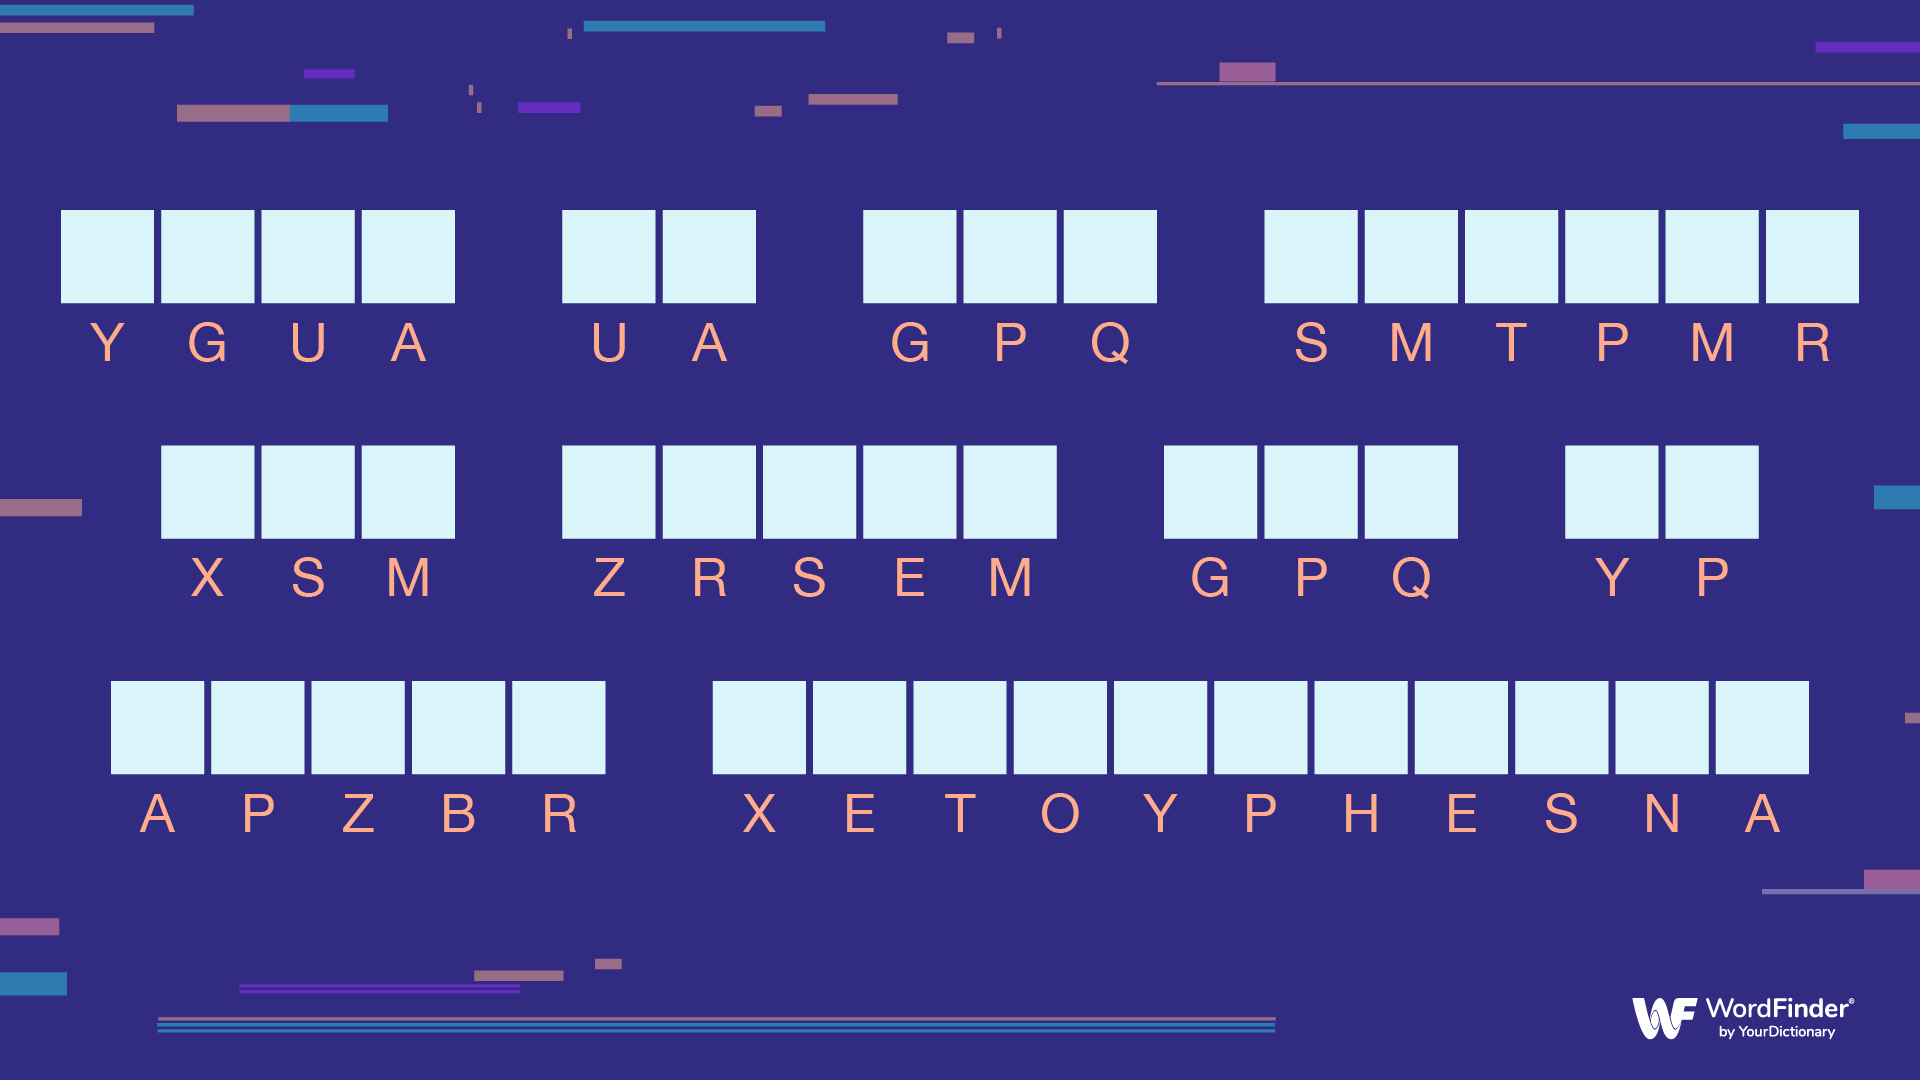 How To Solve Cryptograms In 7 Steps